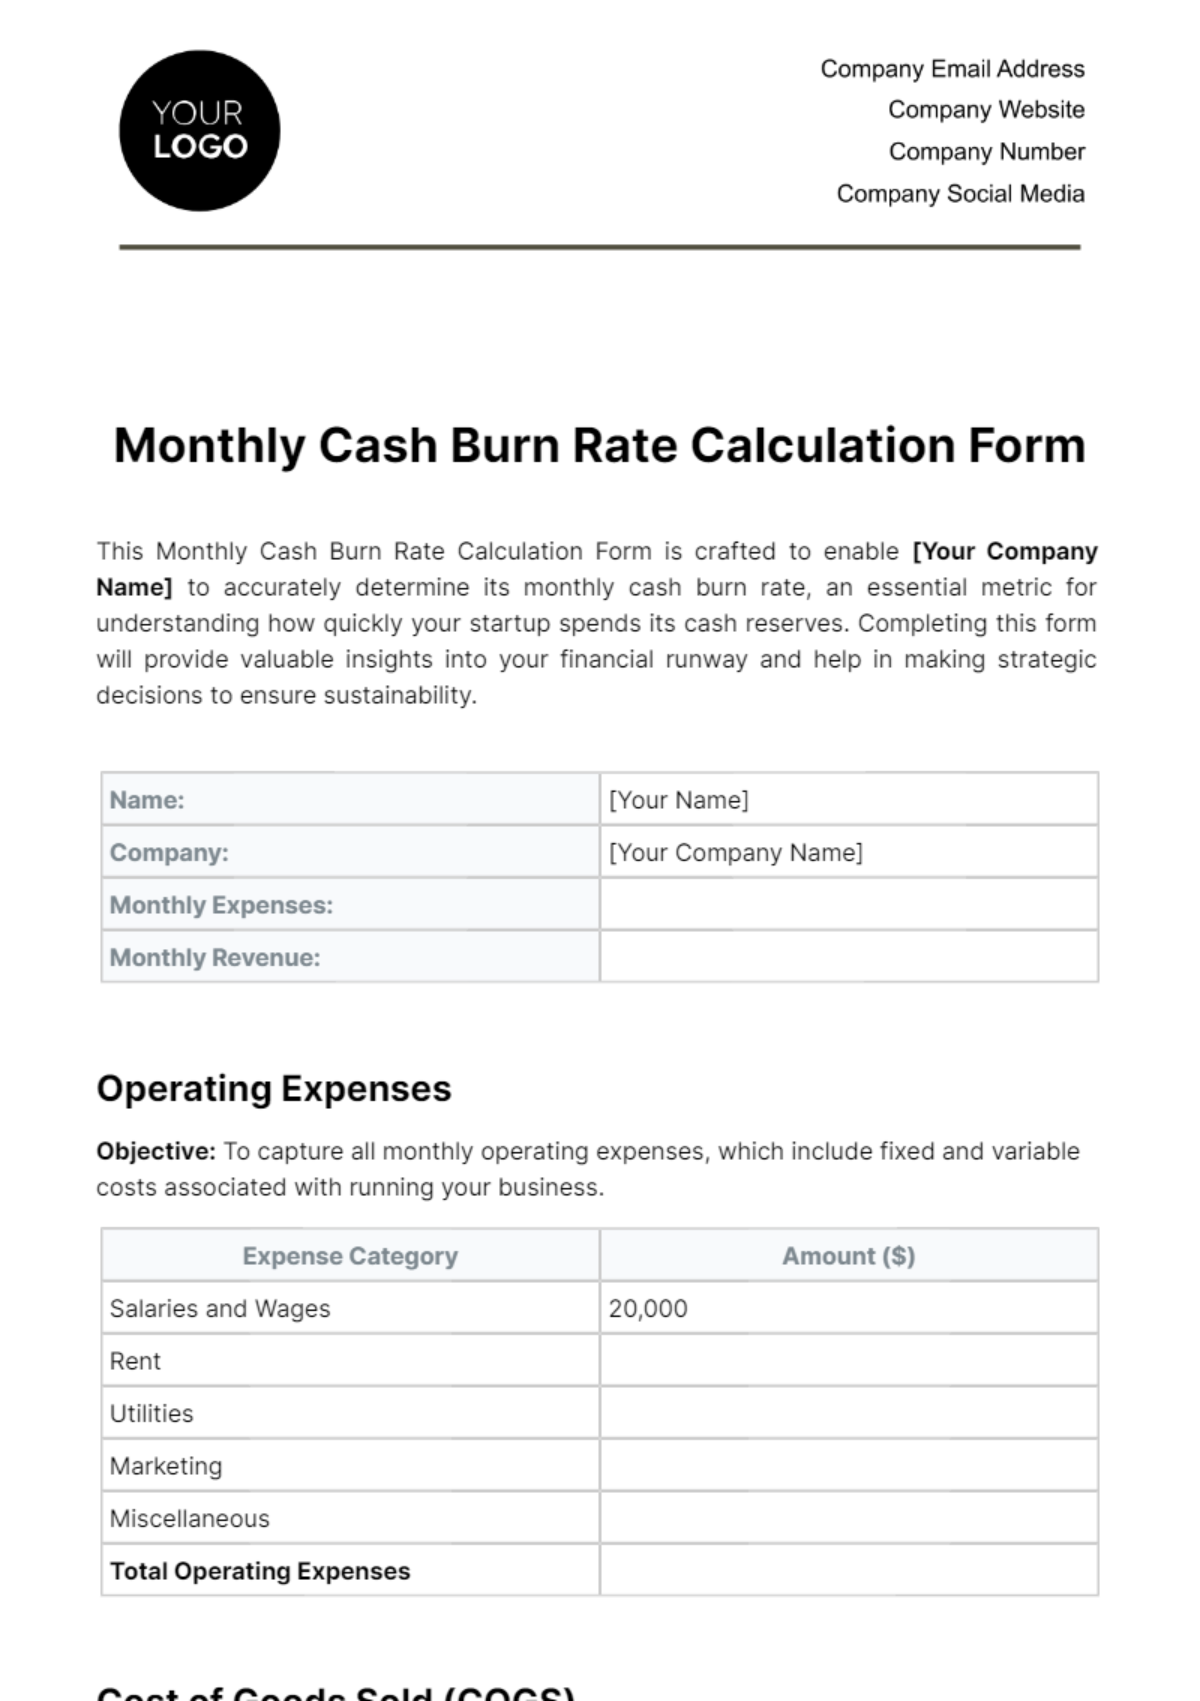 Free Monthly Cash Burn Rate Calculation Form